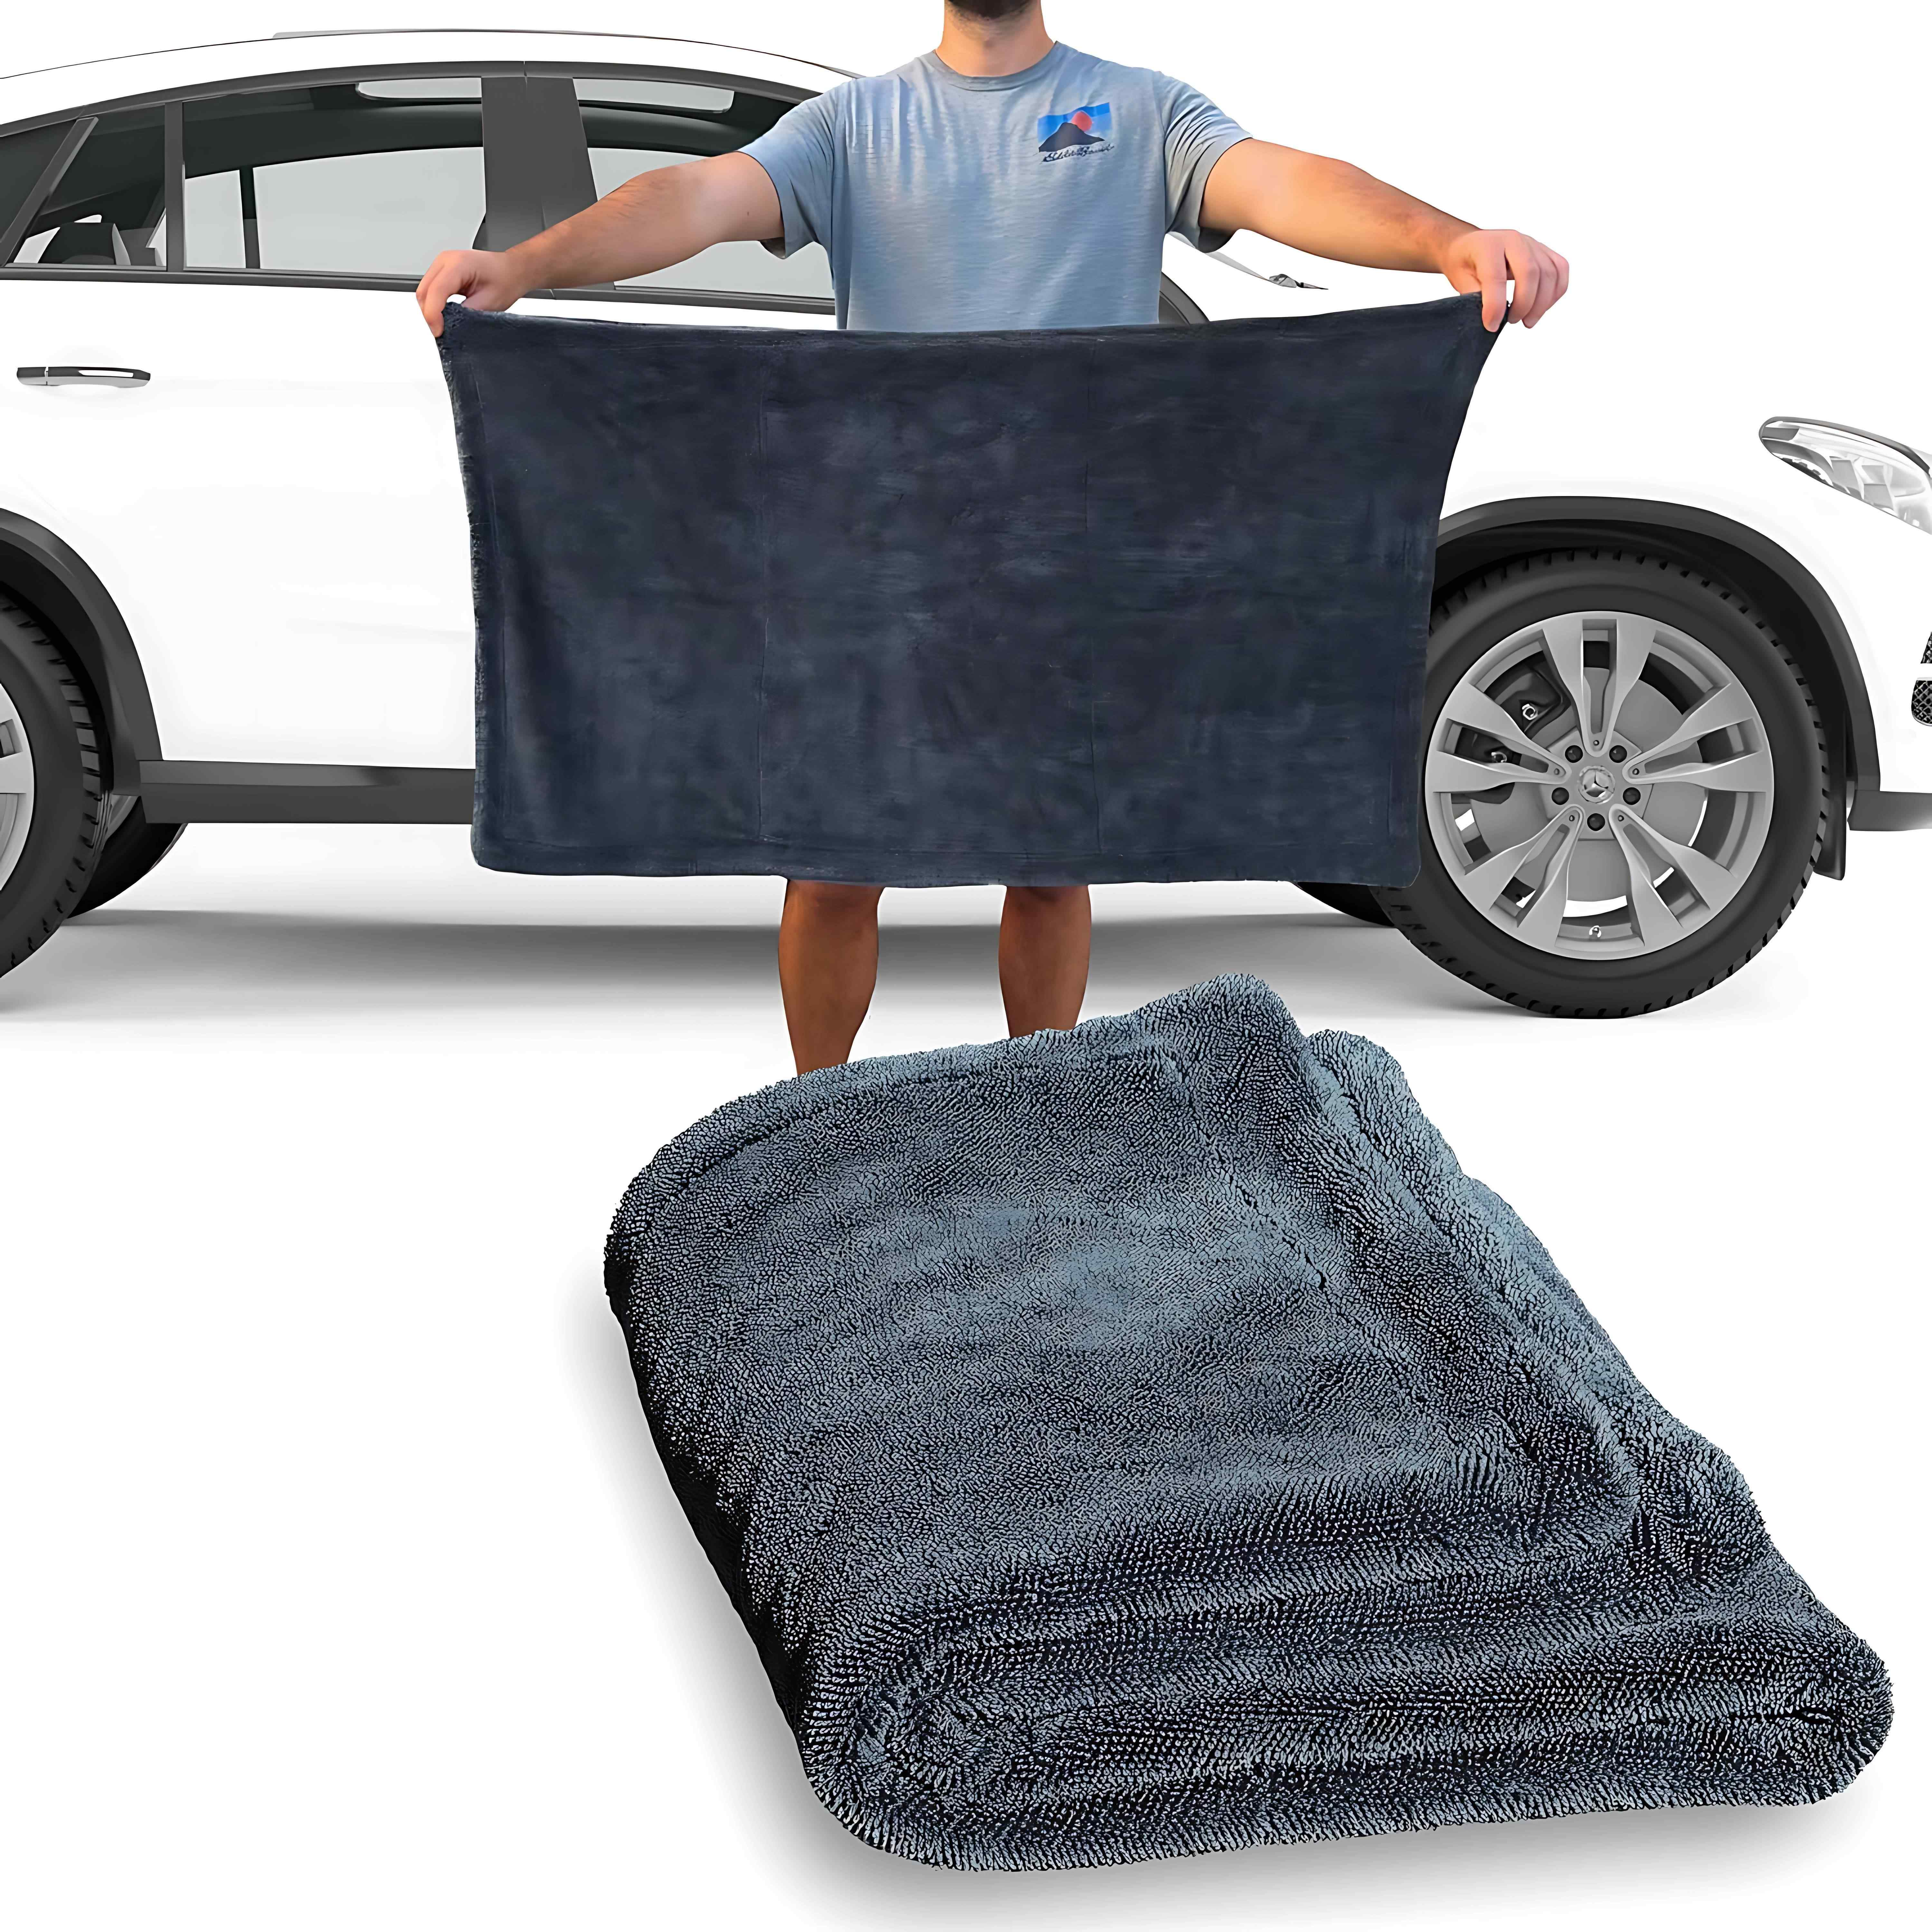 

Car Drying Towel - Ultrafine Microfiber - Dual-twist Pile And Borderless Design For Quick And Effortless Drying